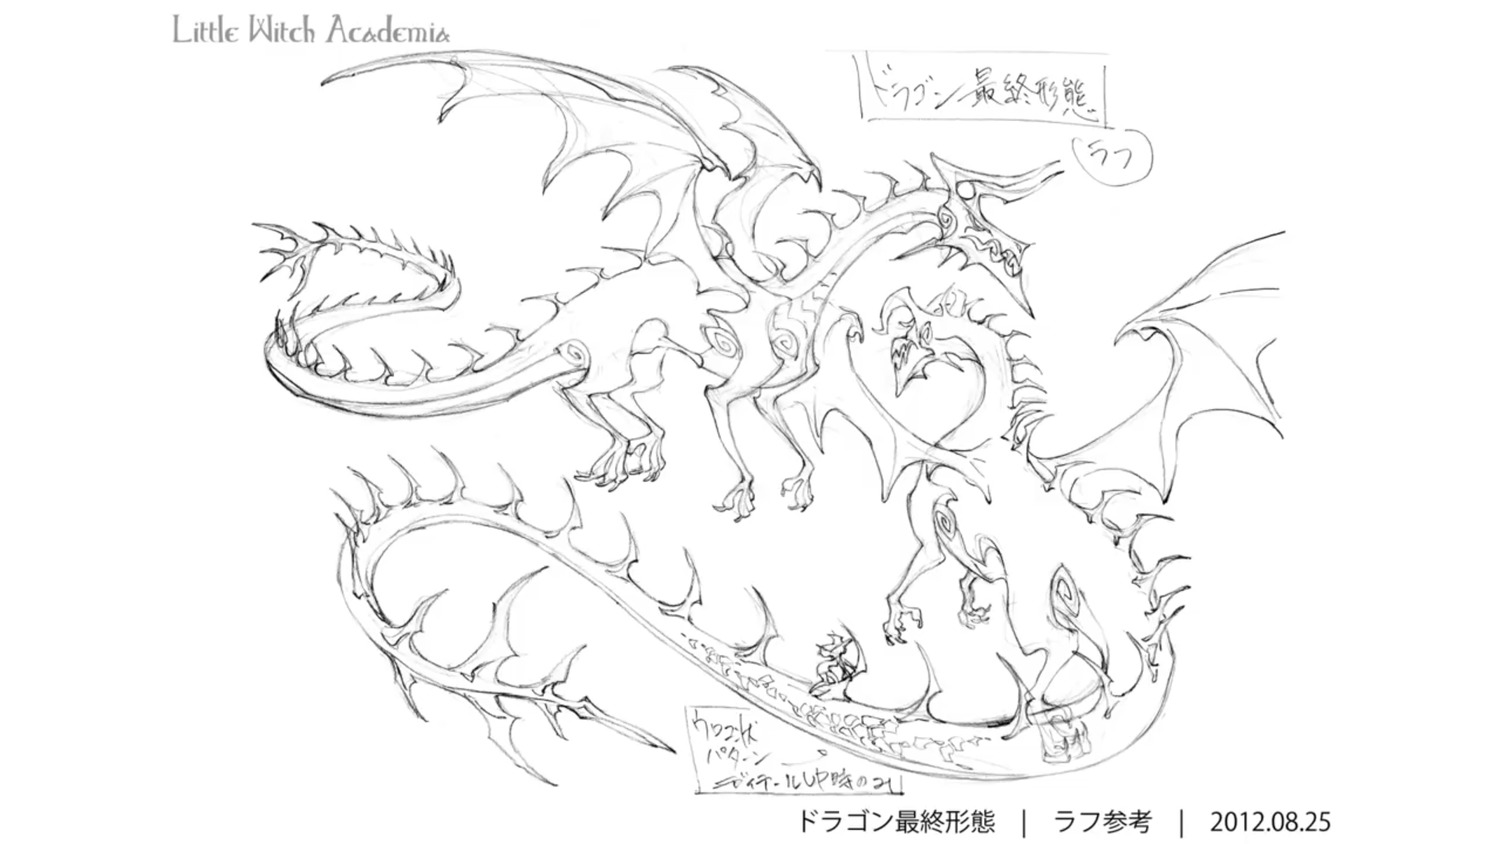 character_design creatures little_witch_academia production_materials settei yoh_yoshinari